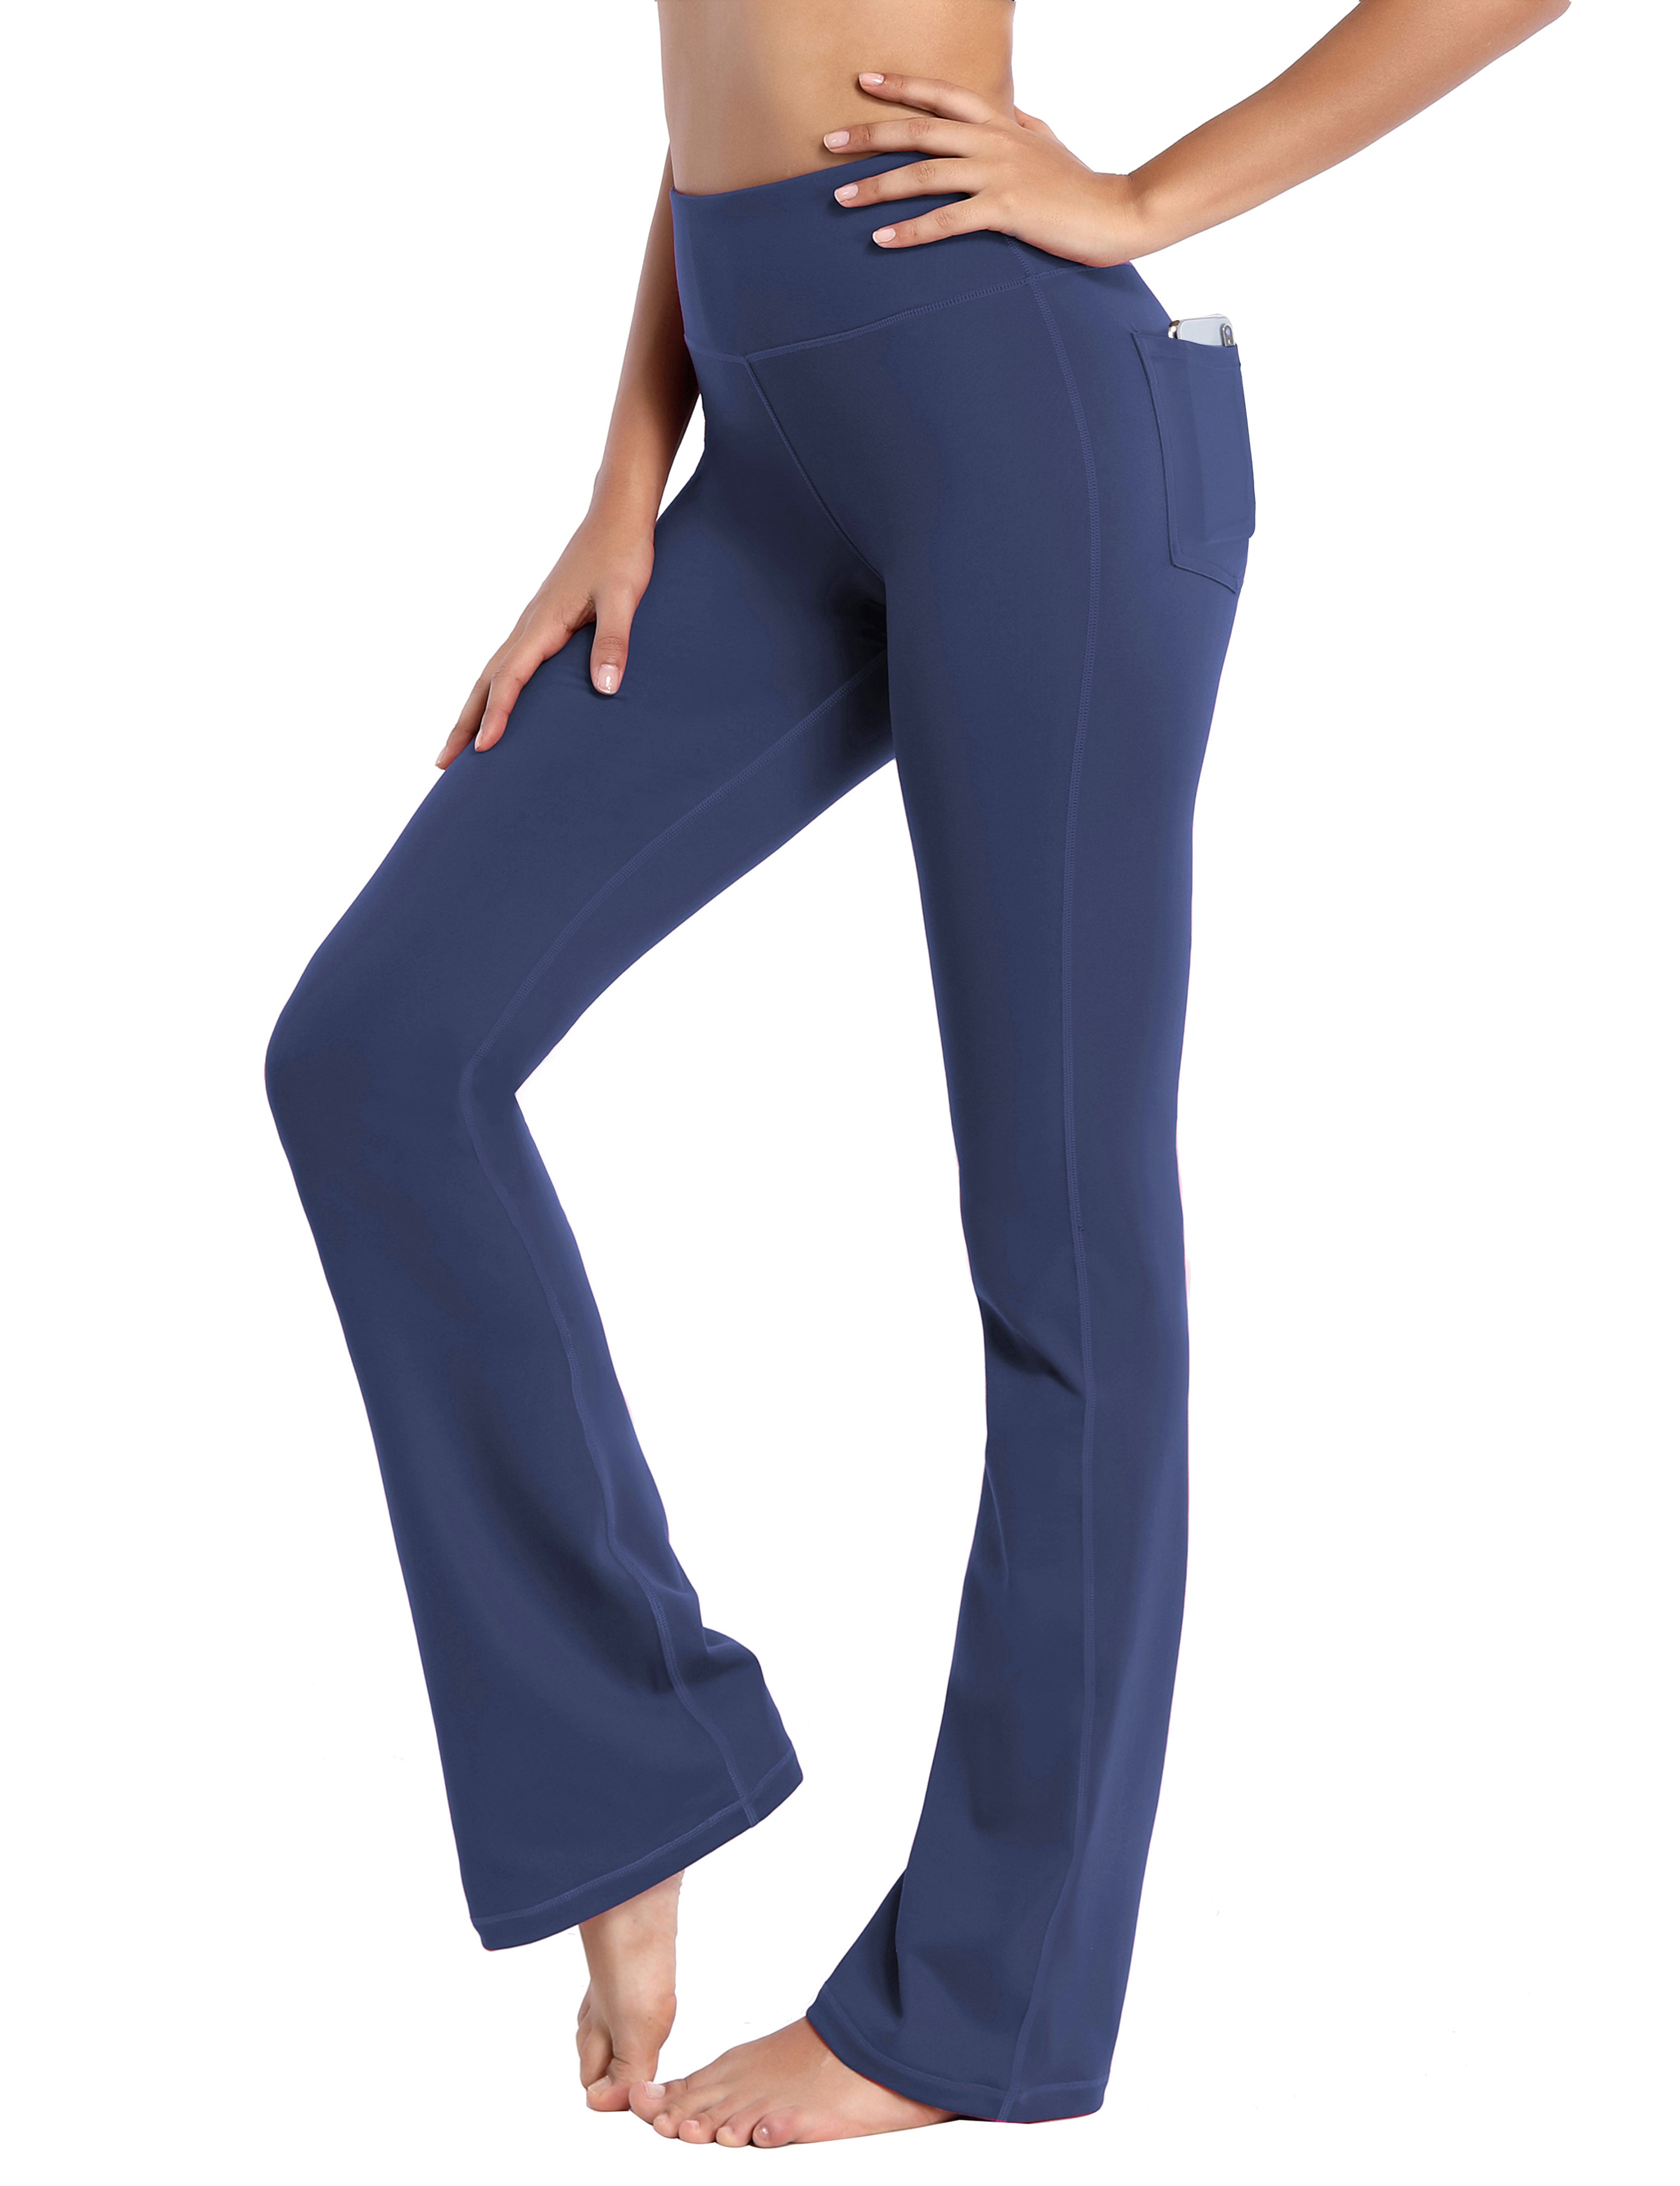 Back Pockets Bootcut Leggings purplishblue 87%Nylon/13%Spandex Fabric doesn't attract lint easily 4-way stretch No see-through Moisture-wicking Inner pocket Four lengths